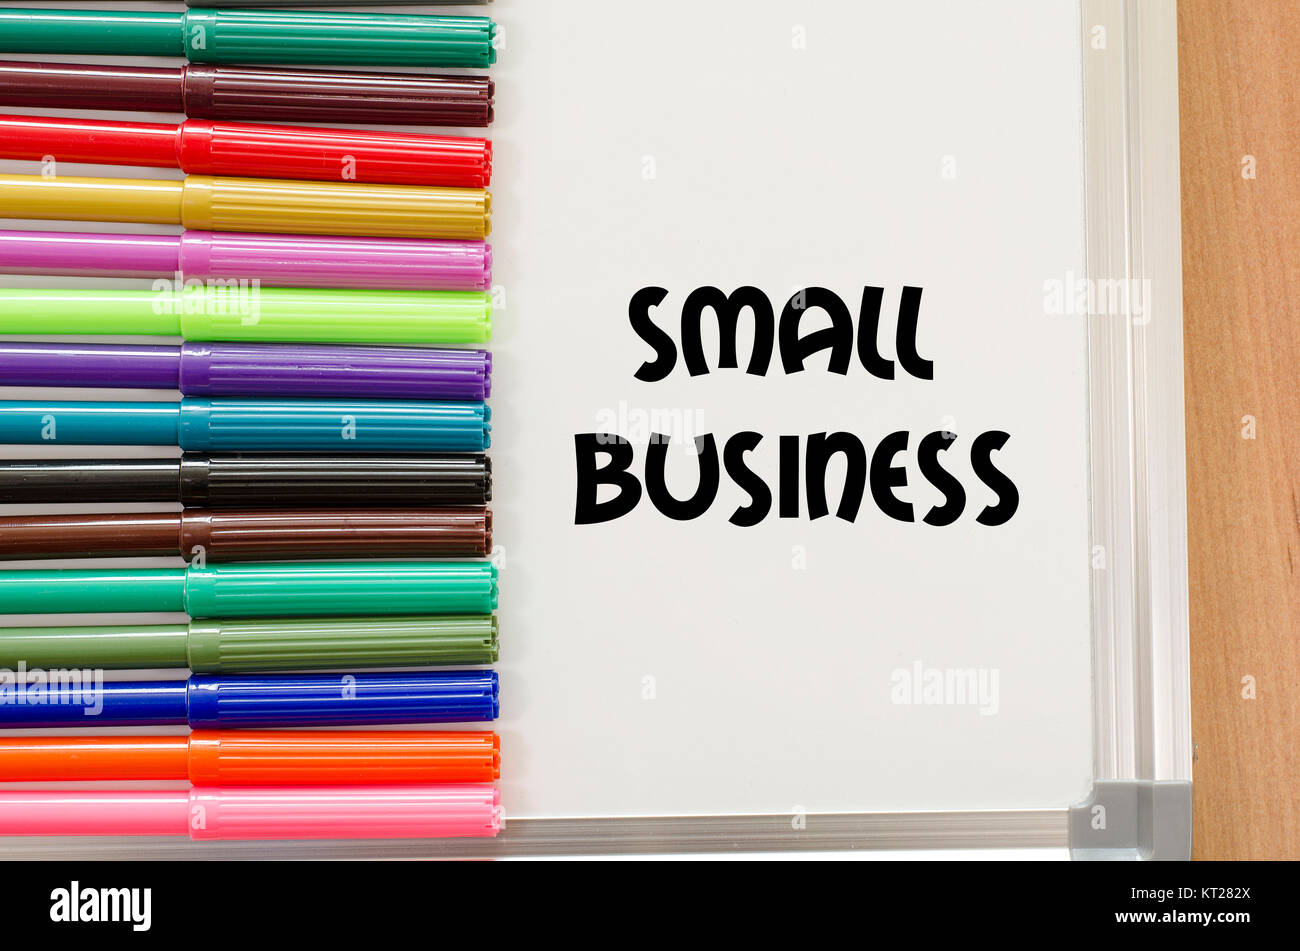 Small business text concept Stock Photo